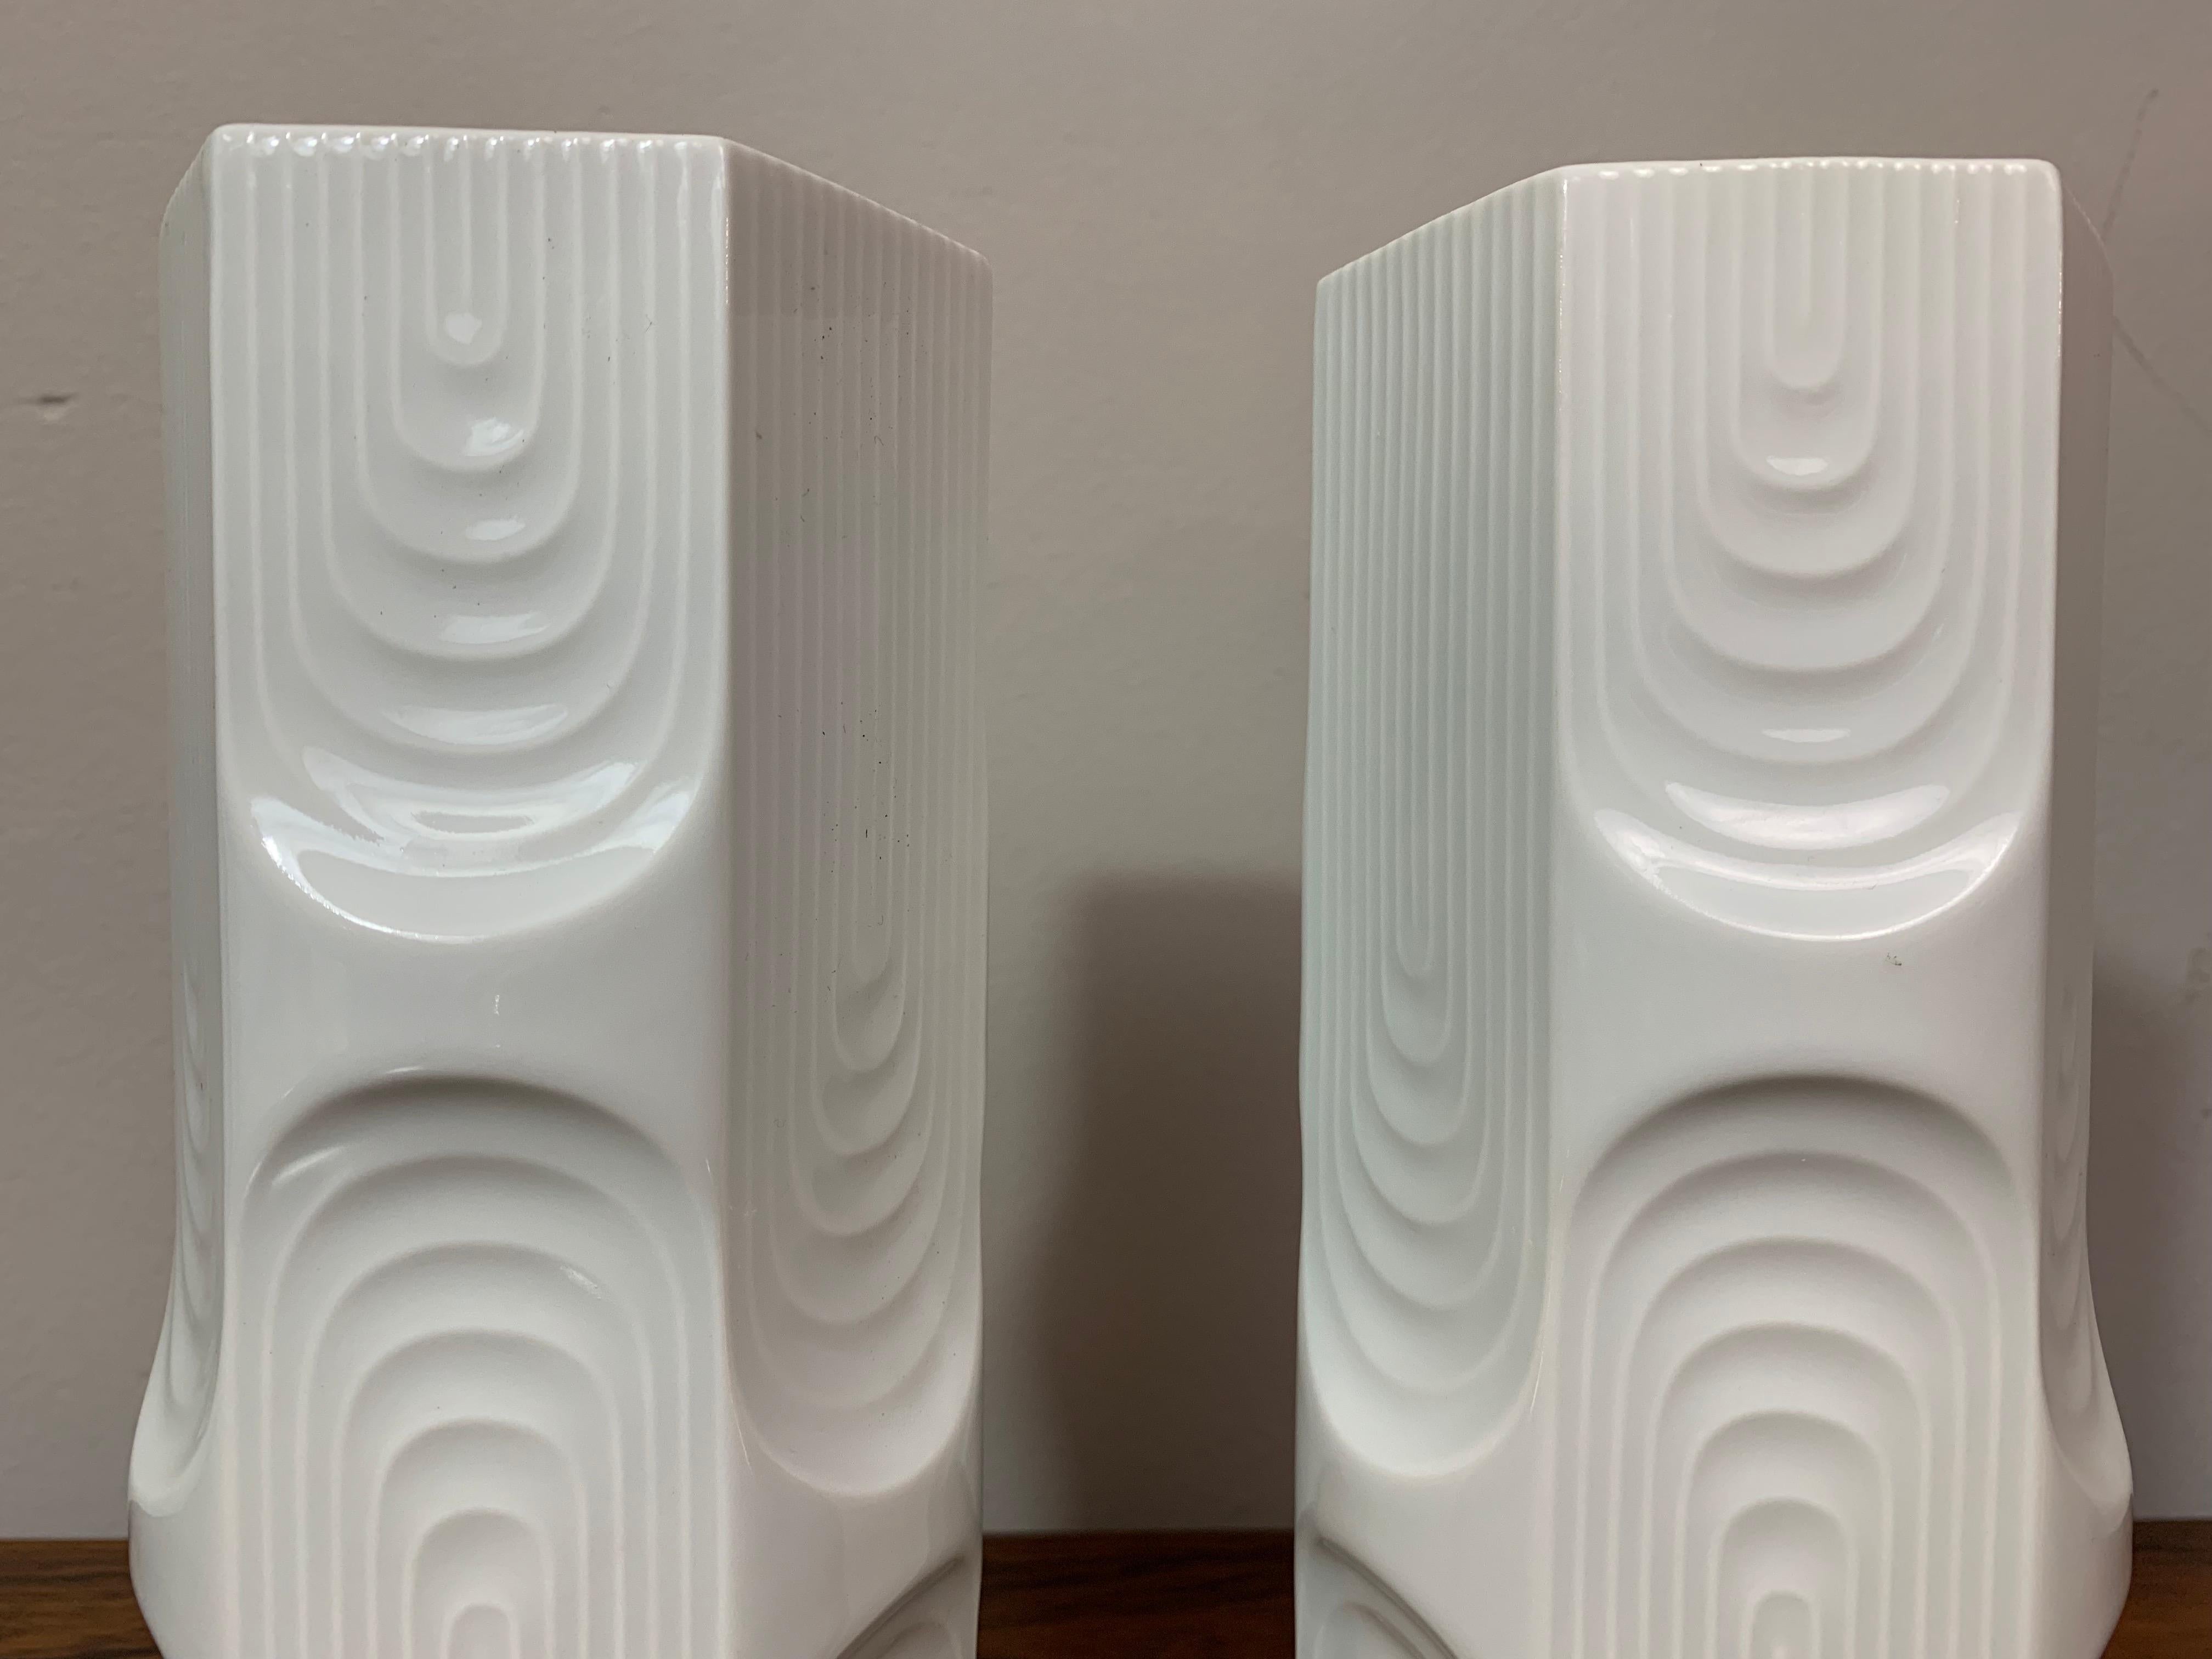 A 1970s op art white gloss vase manufactured by AK Kaiser of West Germany. The vases are hexagonal in shape and in excellent vintage condition. Perfect as a pair or on their own.

Stamped on the base with a blue crown and AK Kaiser, W. Germany